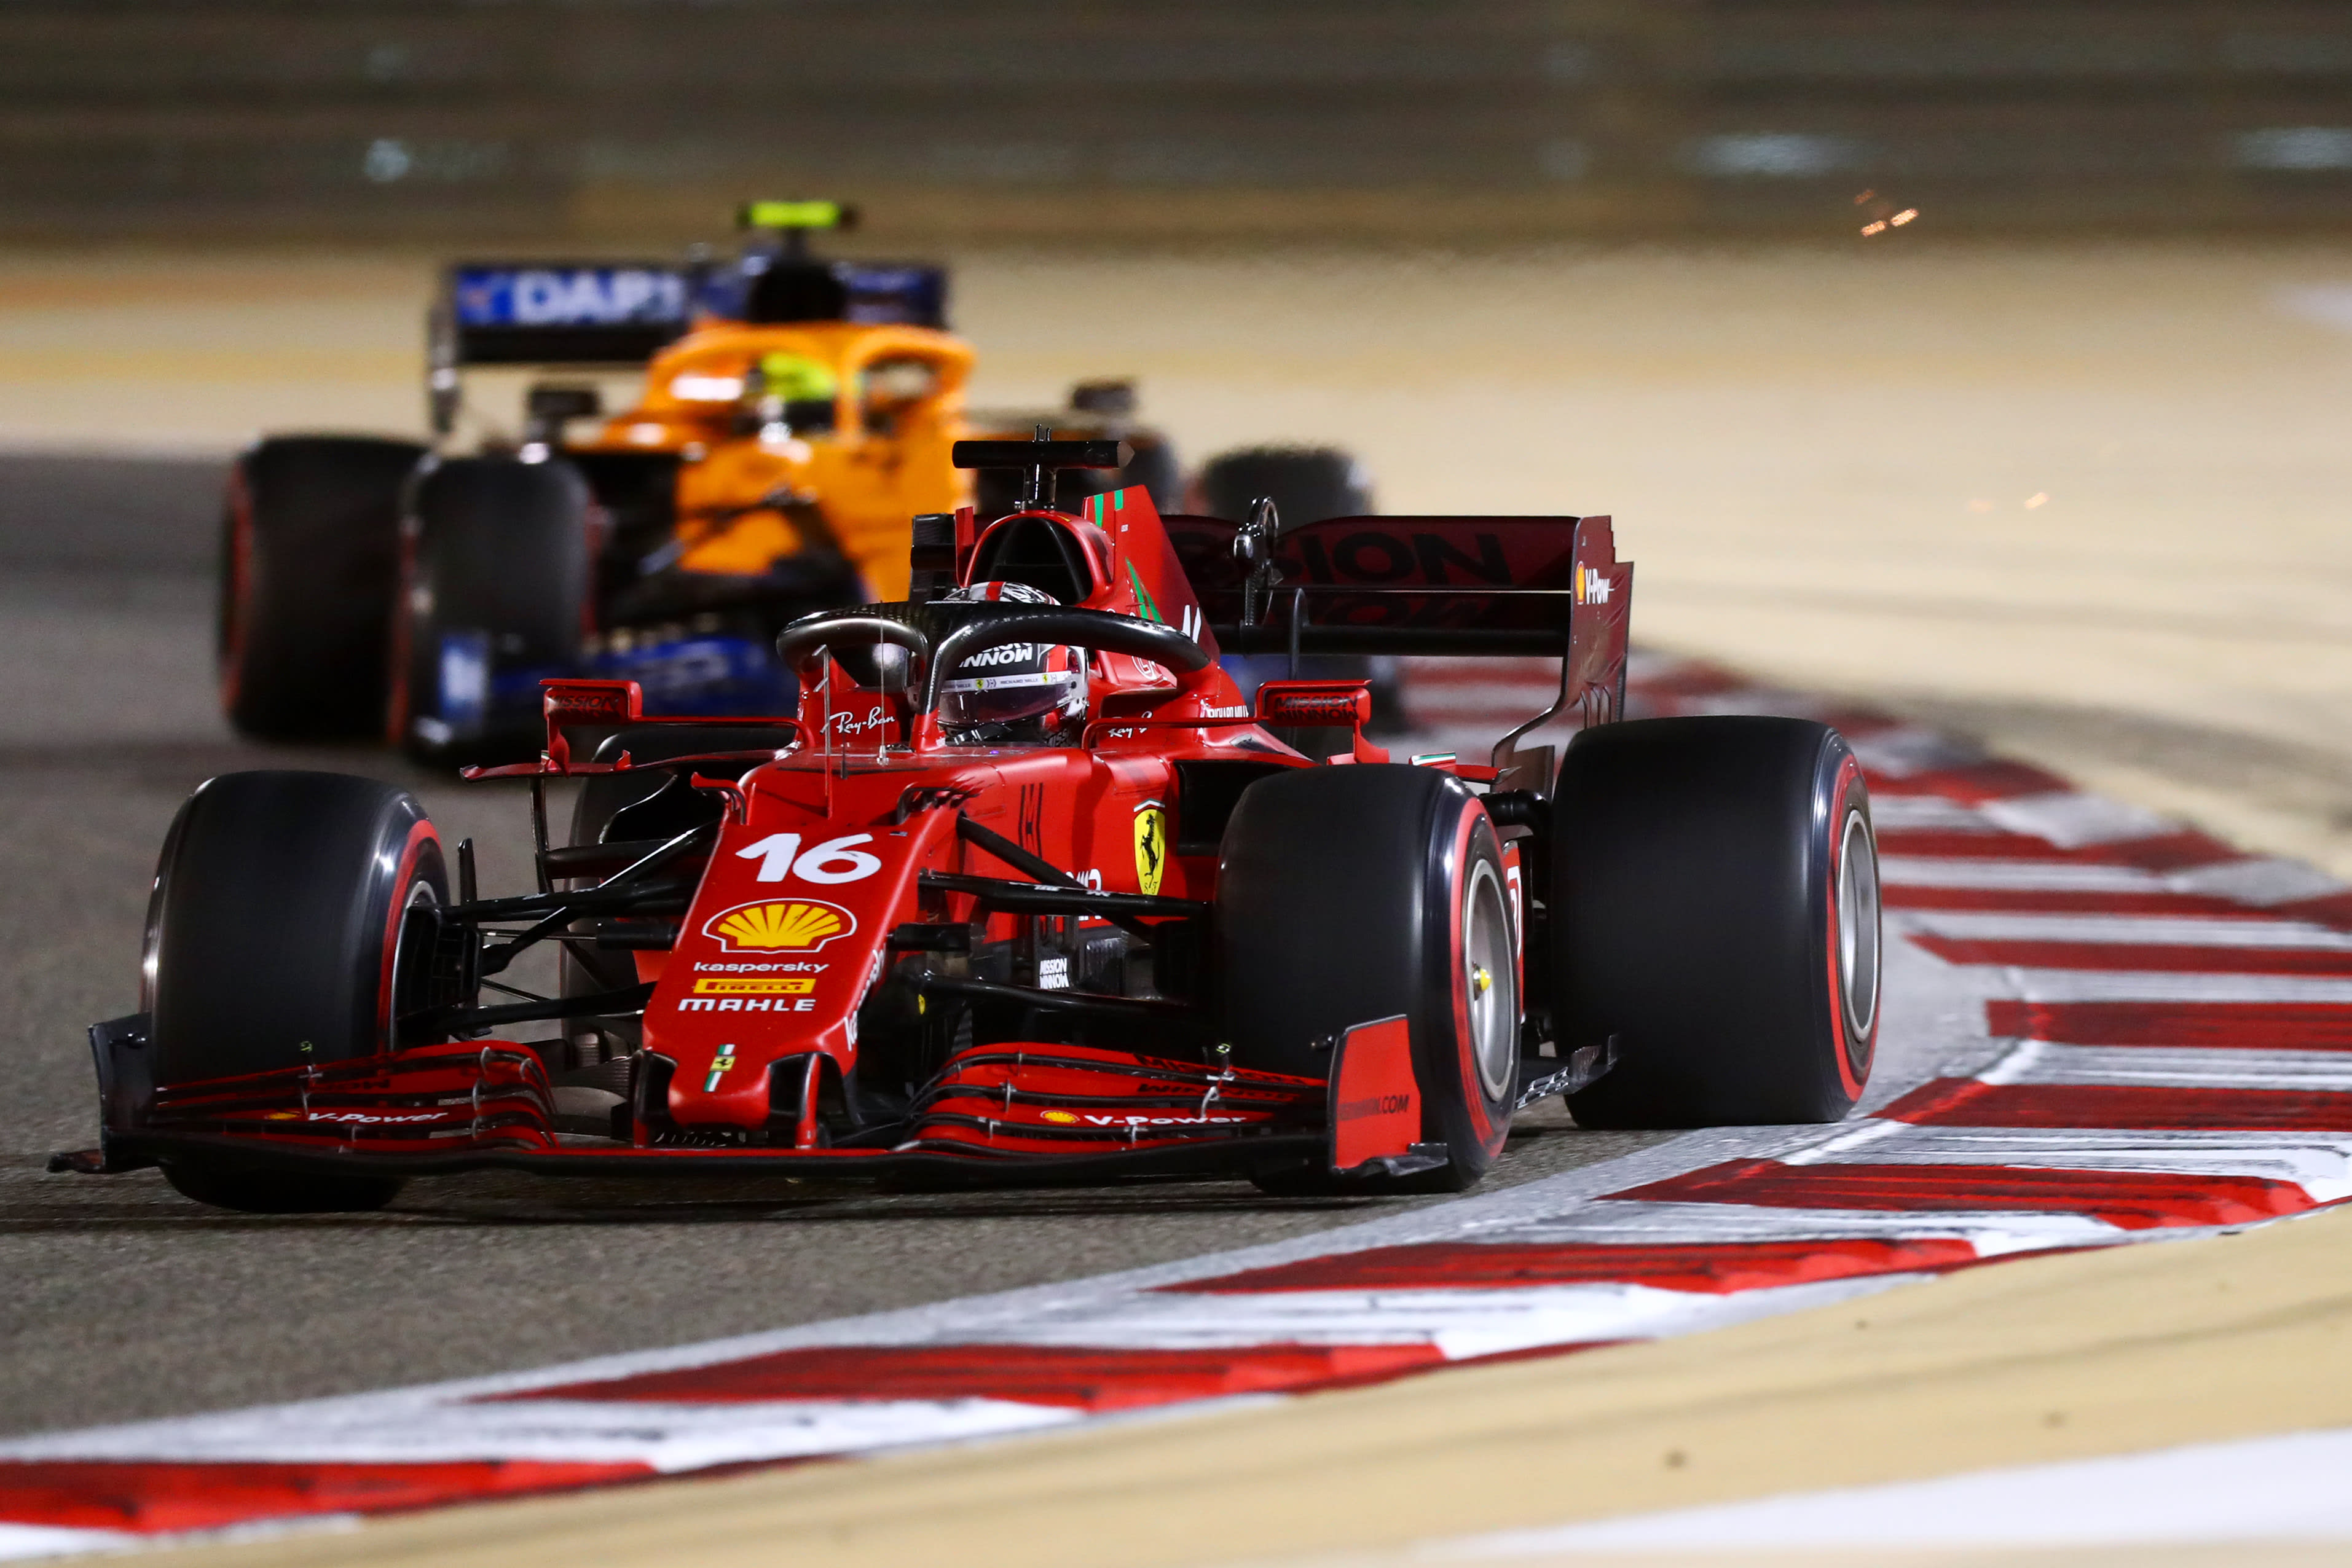 Ferrari In The Fight With Mclaren Heading To Imola Say Sainz And Leclerc Formula 1